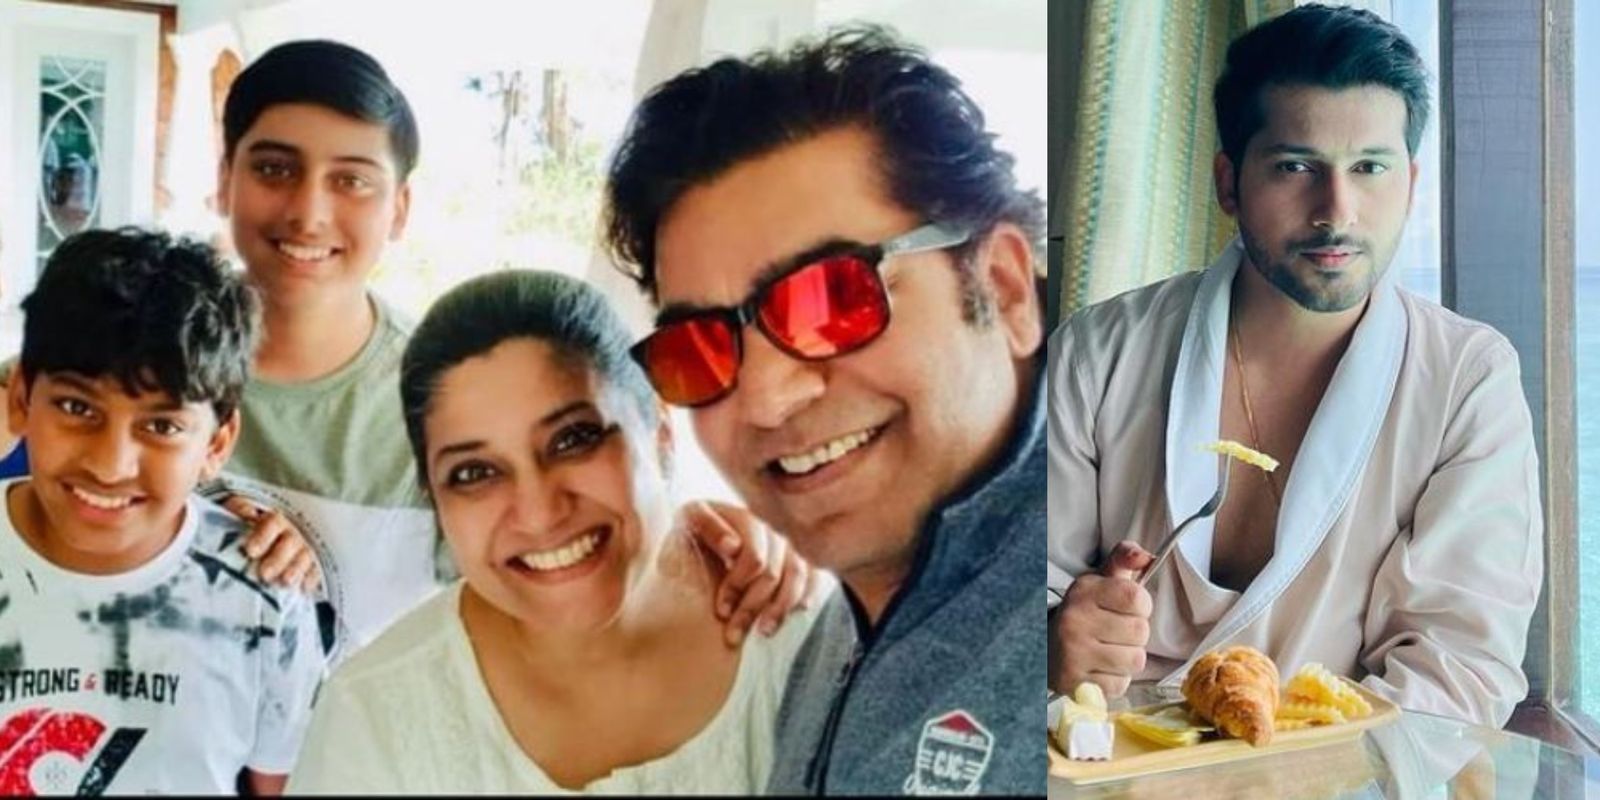 After Ashutosh Rana, Wife Renuka Shahane And Their Children Contract COVID-19, Namish Taneja Stuck In Maldives After Testing Positive